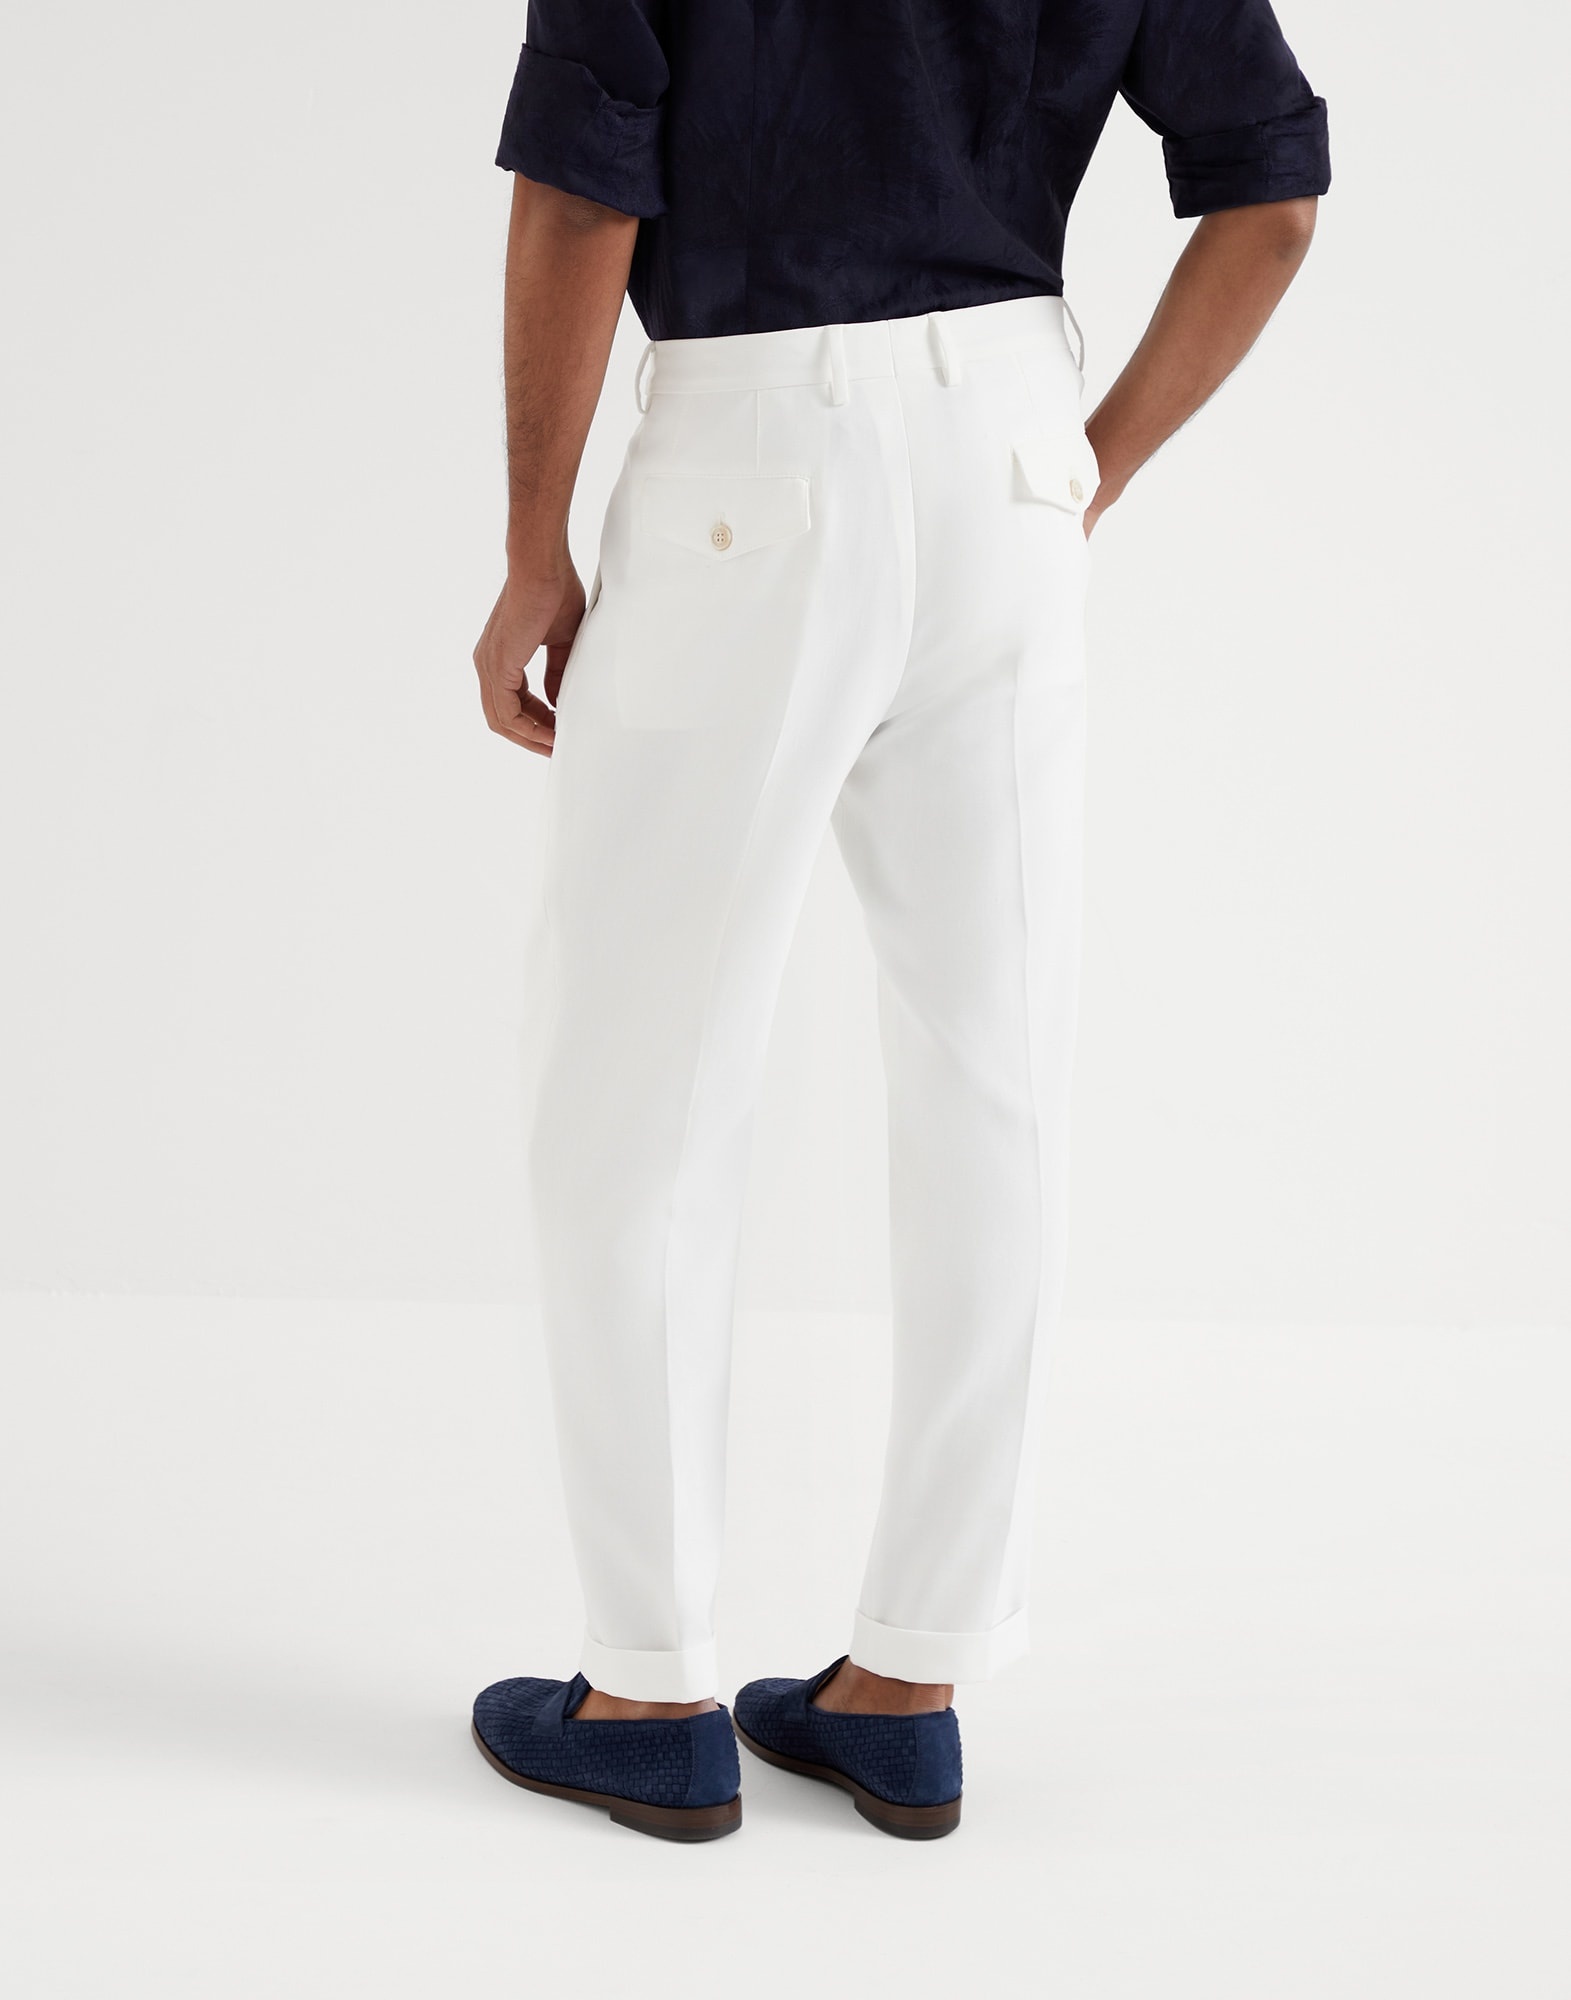 Crêpe cotton double twill leisure fit trousers with double pleats and tabbed waistband - 2